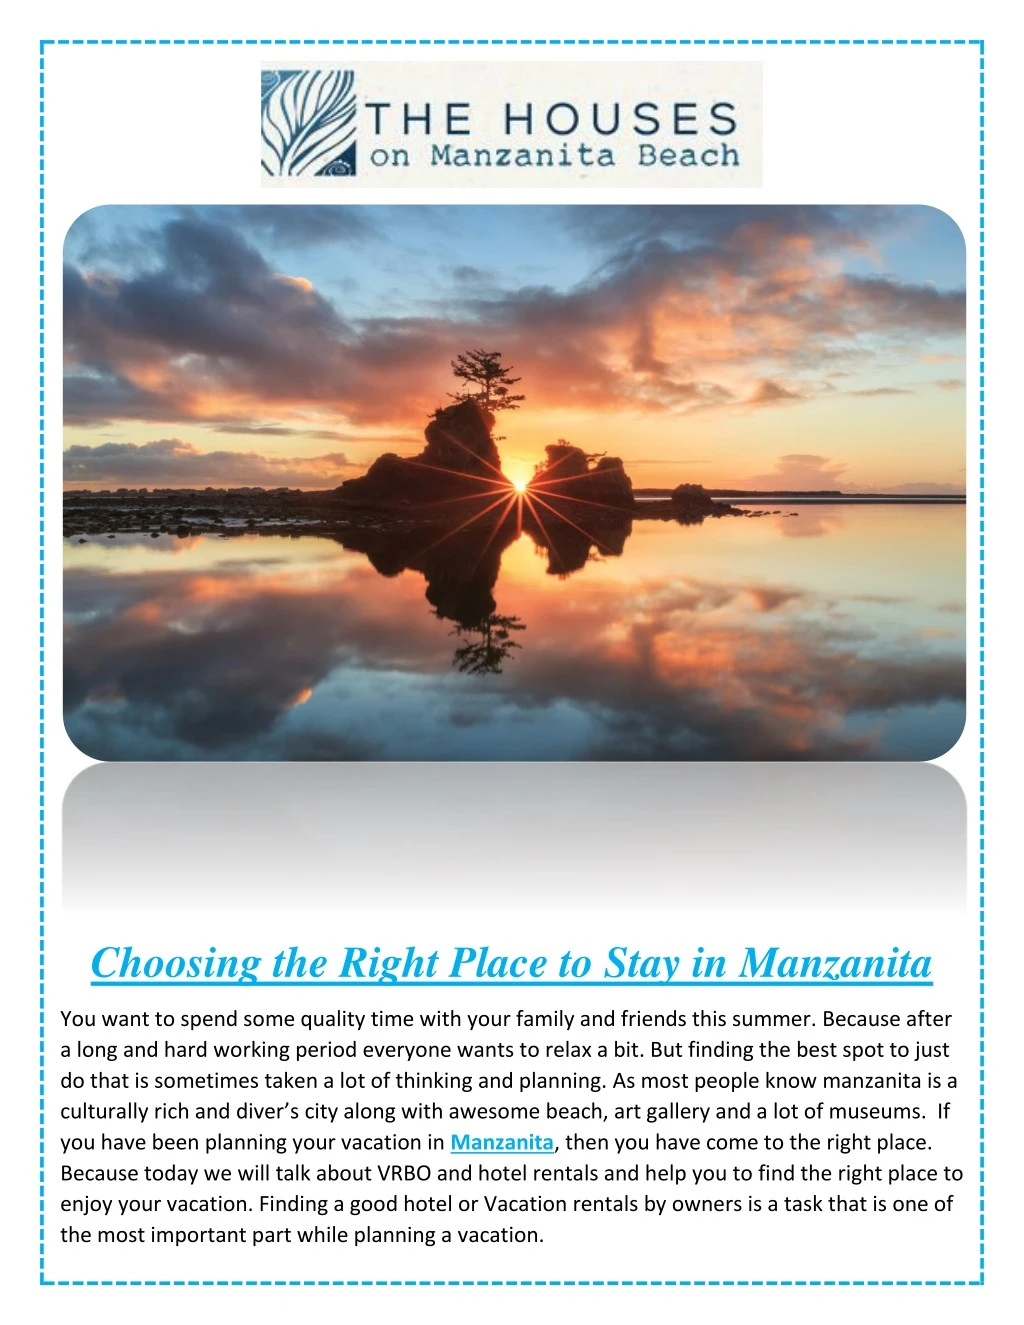 choosing the right place to stay in manzanita